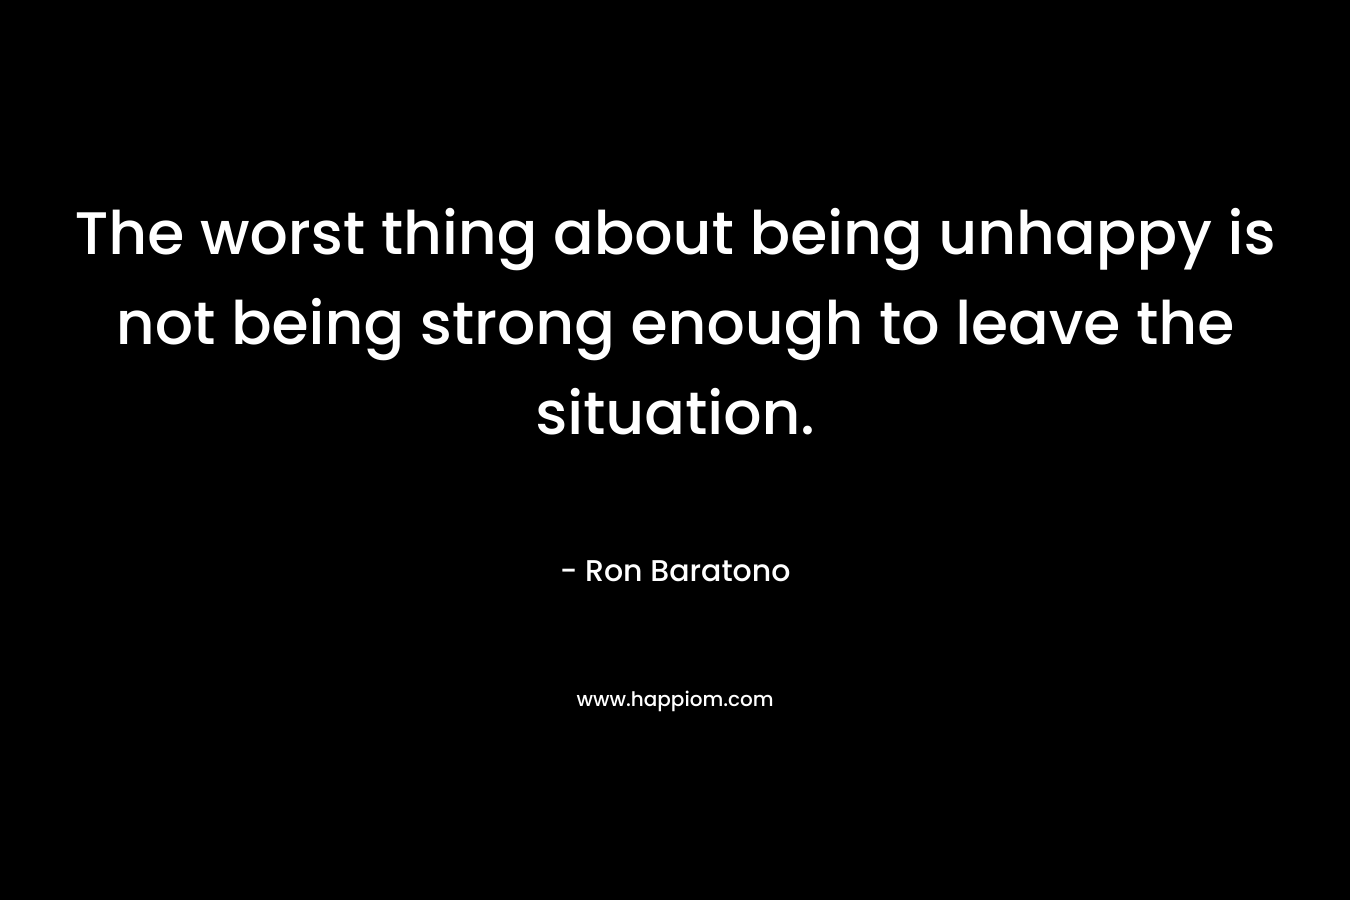 The worst thing about being unhappy is not being strong enough to leave the situation. – Ron Baratono